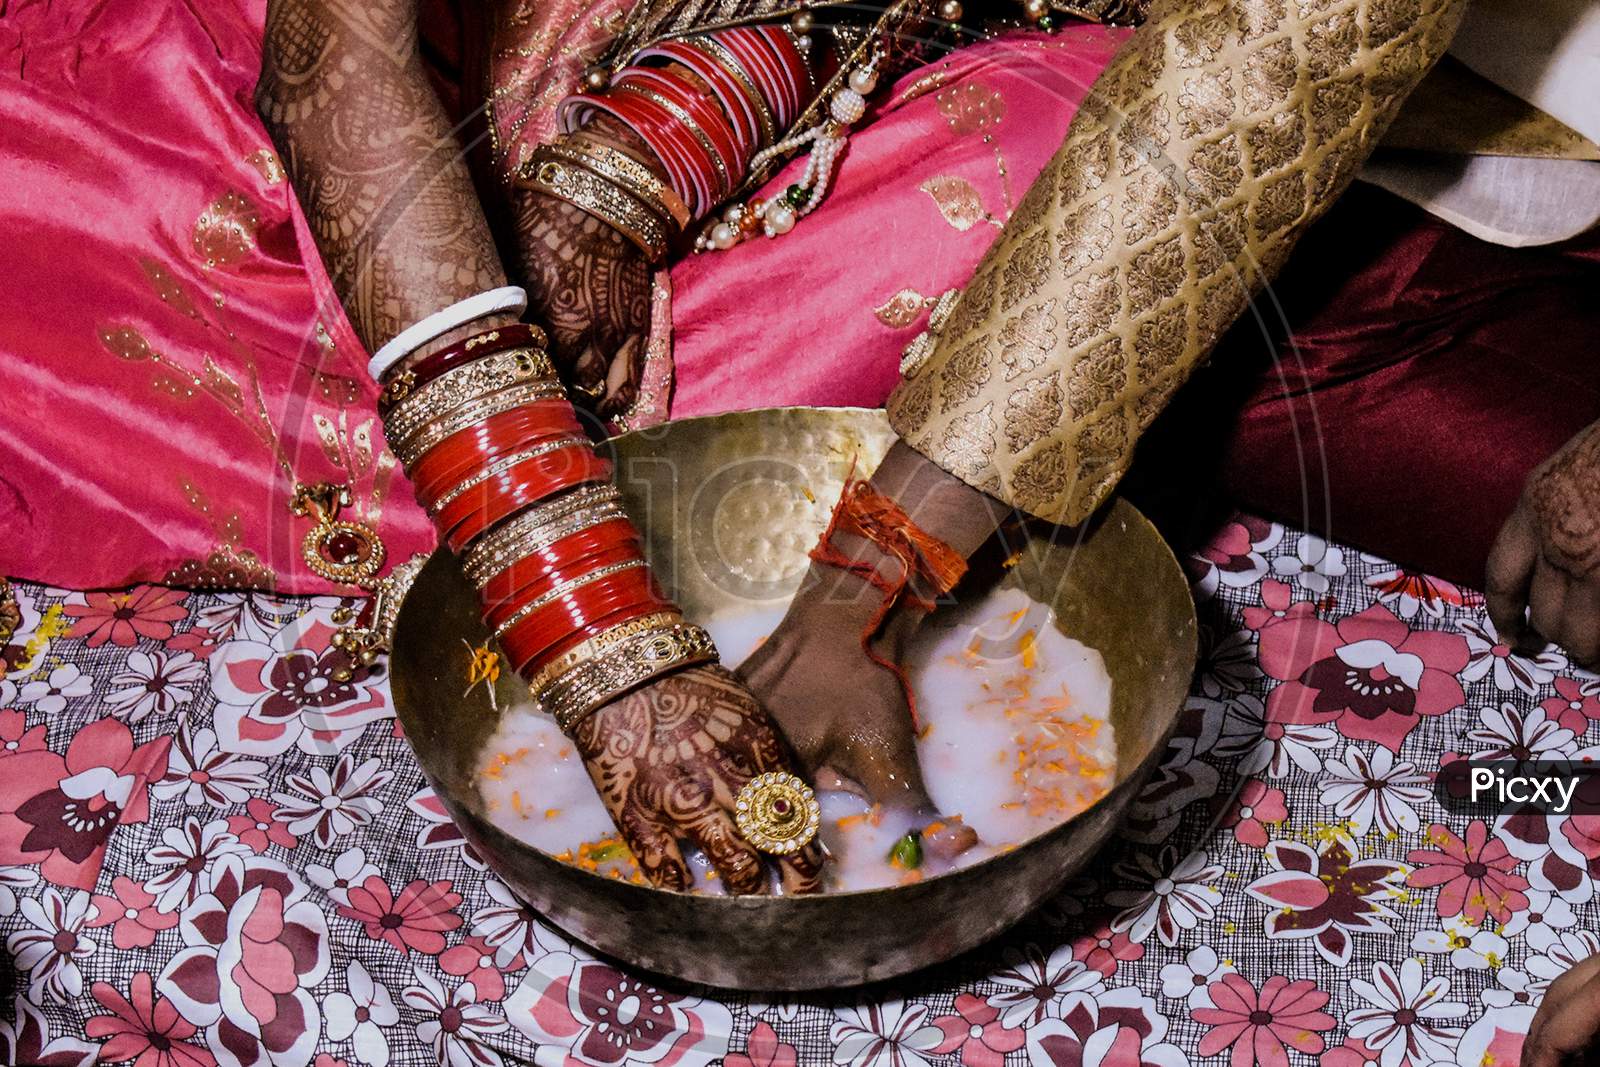 Indian wedding ceremony, marriage, traditions, Hindu culture